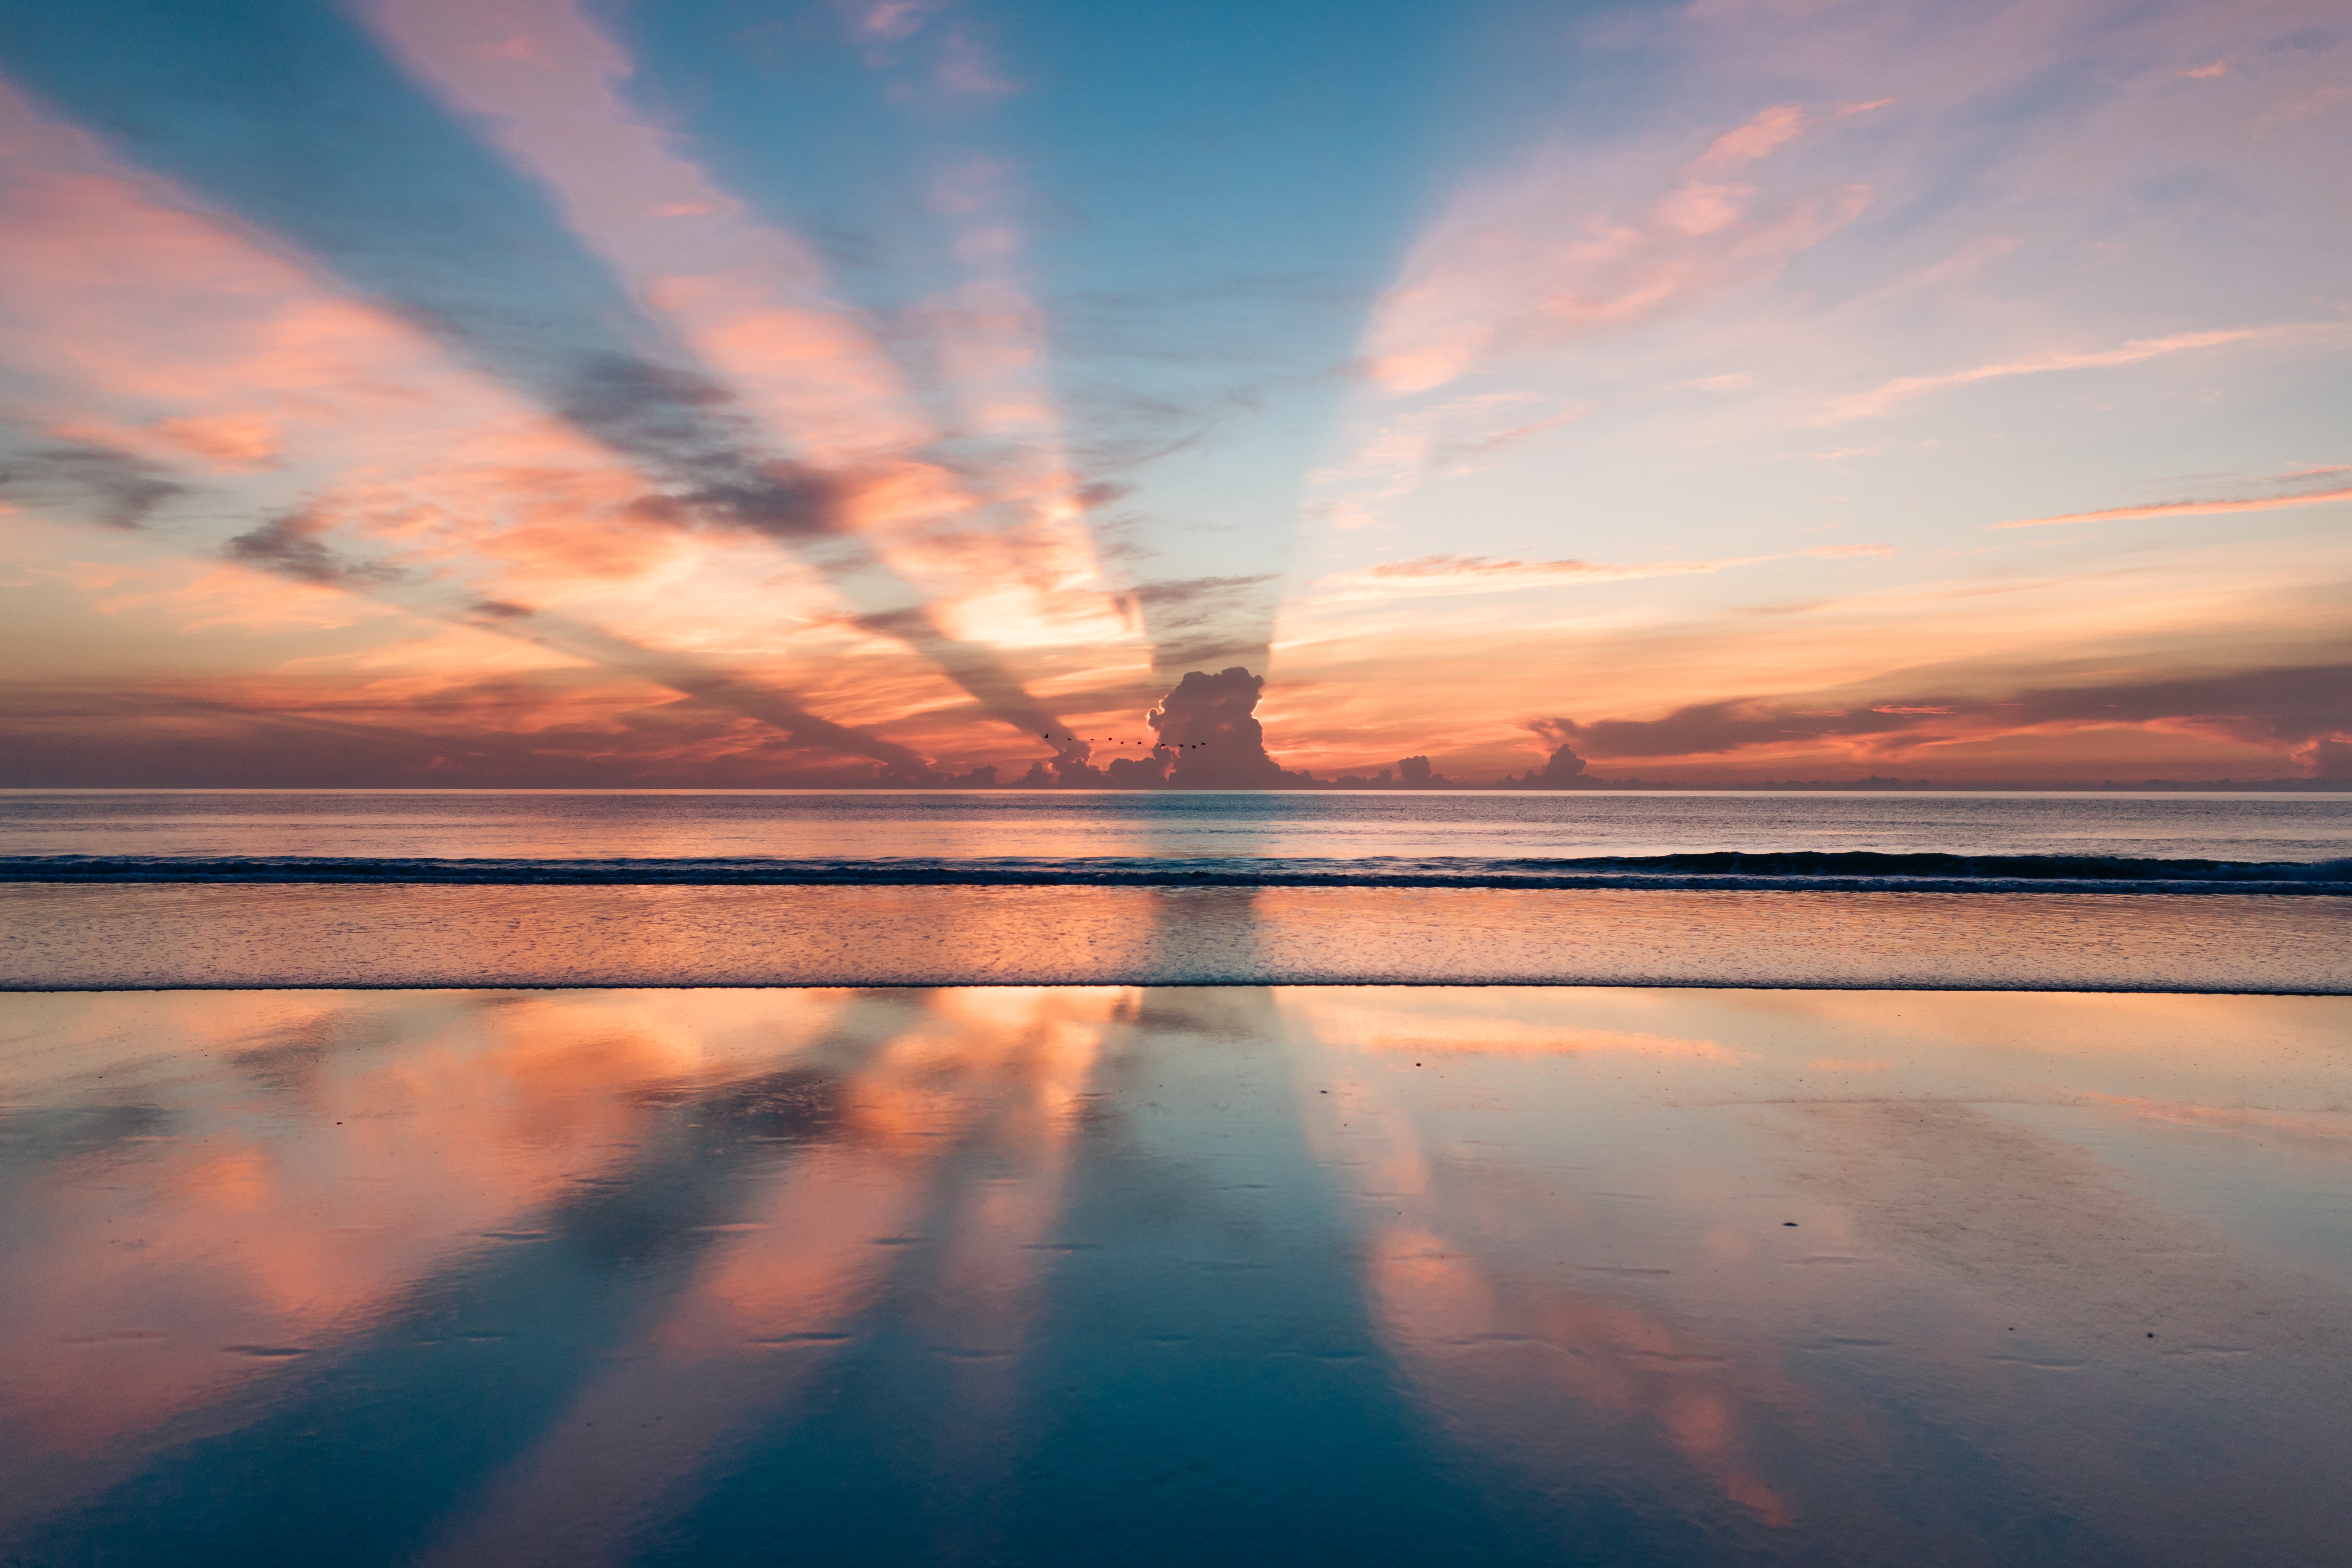 6436x4291 #psalm #florida, #sunset, #beach, #water, #coast, #calm, #sand, #sky, #ocean, #creation, #pink, #sunrise, #orange, #sunray, #blue, #reflection, #Free picture, #outdoors, #nature, #relax. Mocah HD Wallpaper